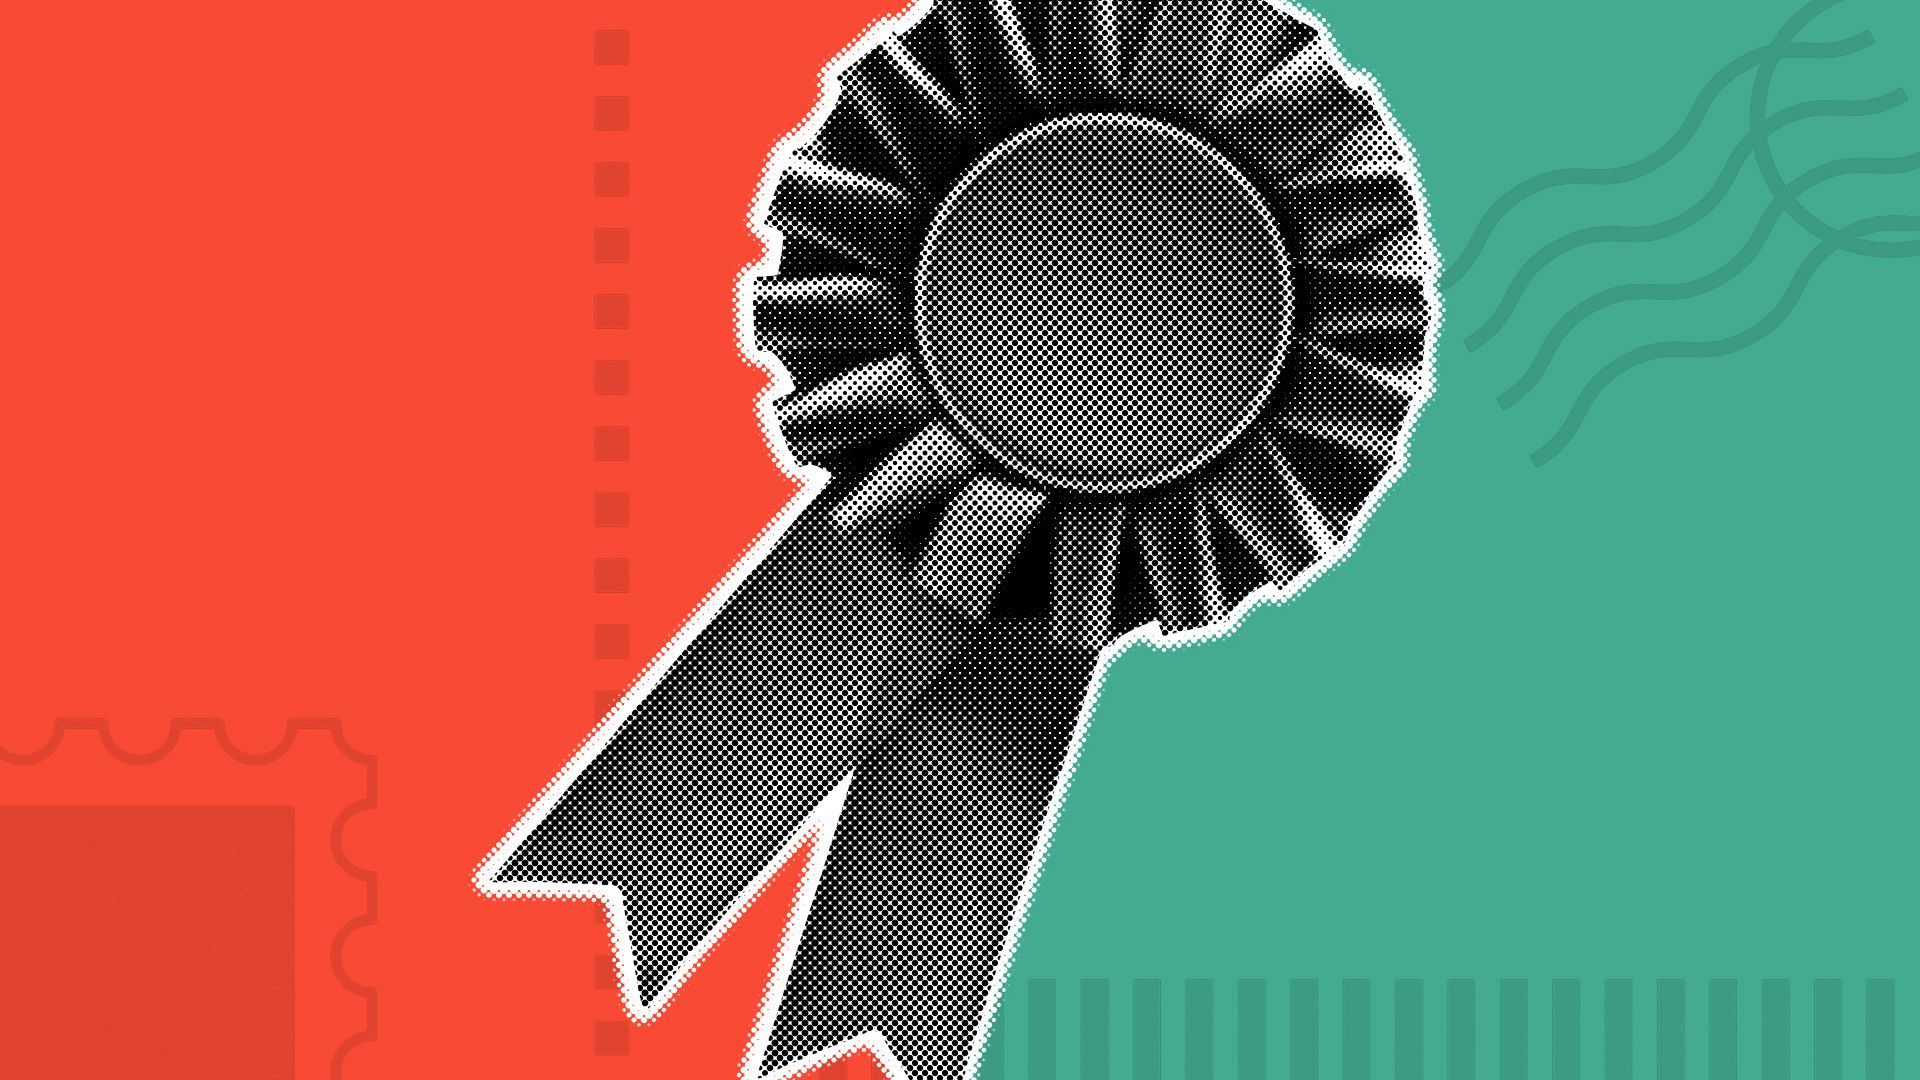 Illustration of a prize ribbon with abstract ballot elements in the background.